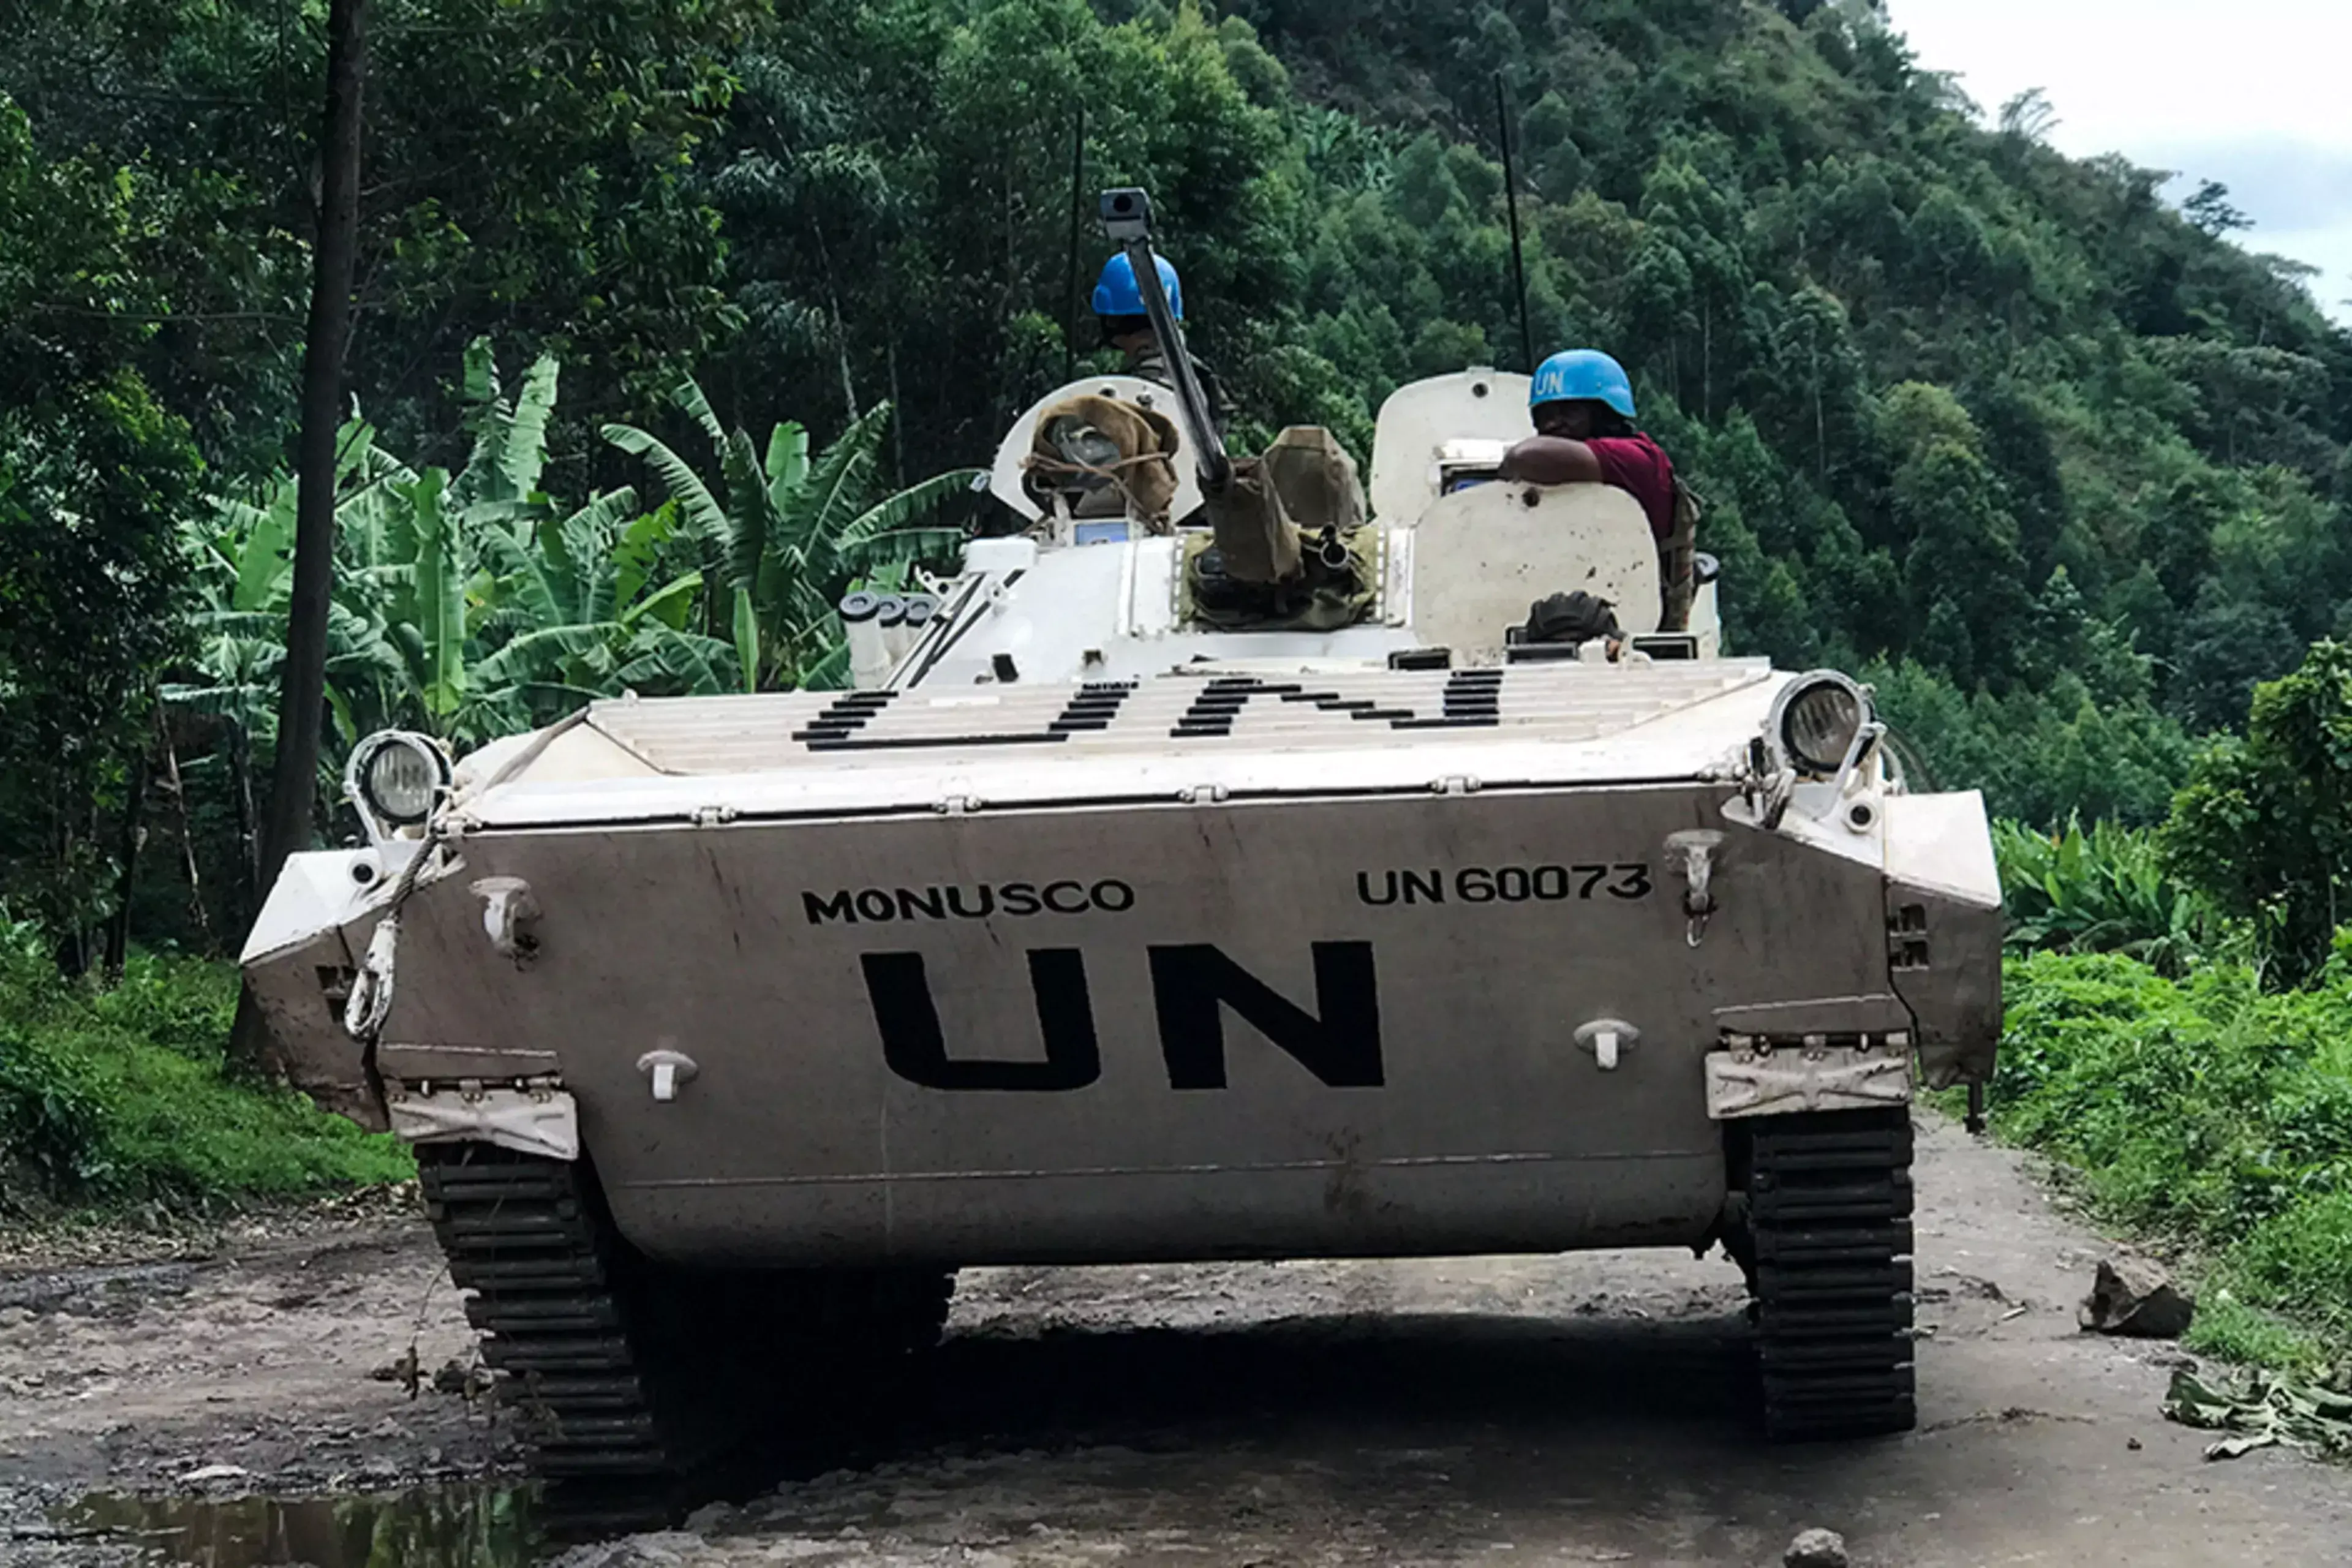 Peacekeepers patrol areas affected by M23 rebel fighters in the Democratic Republic of Congo.